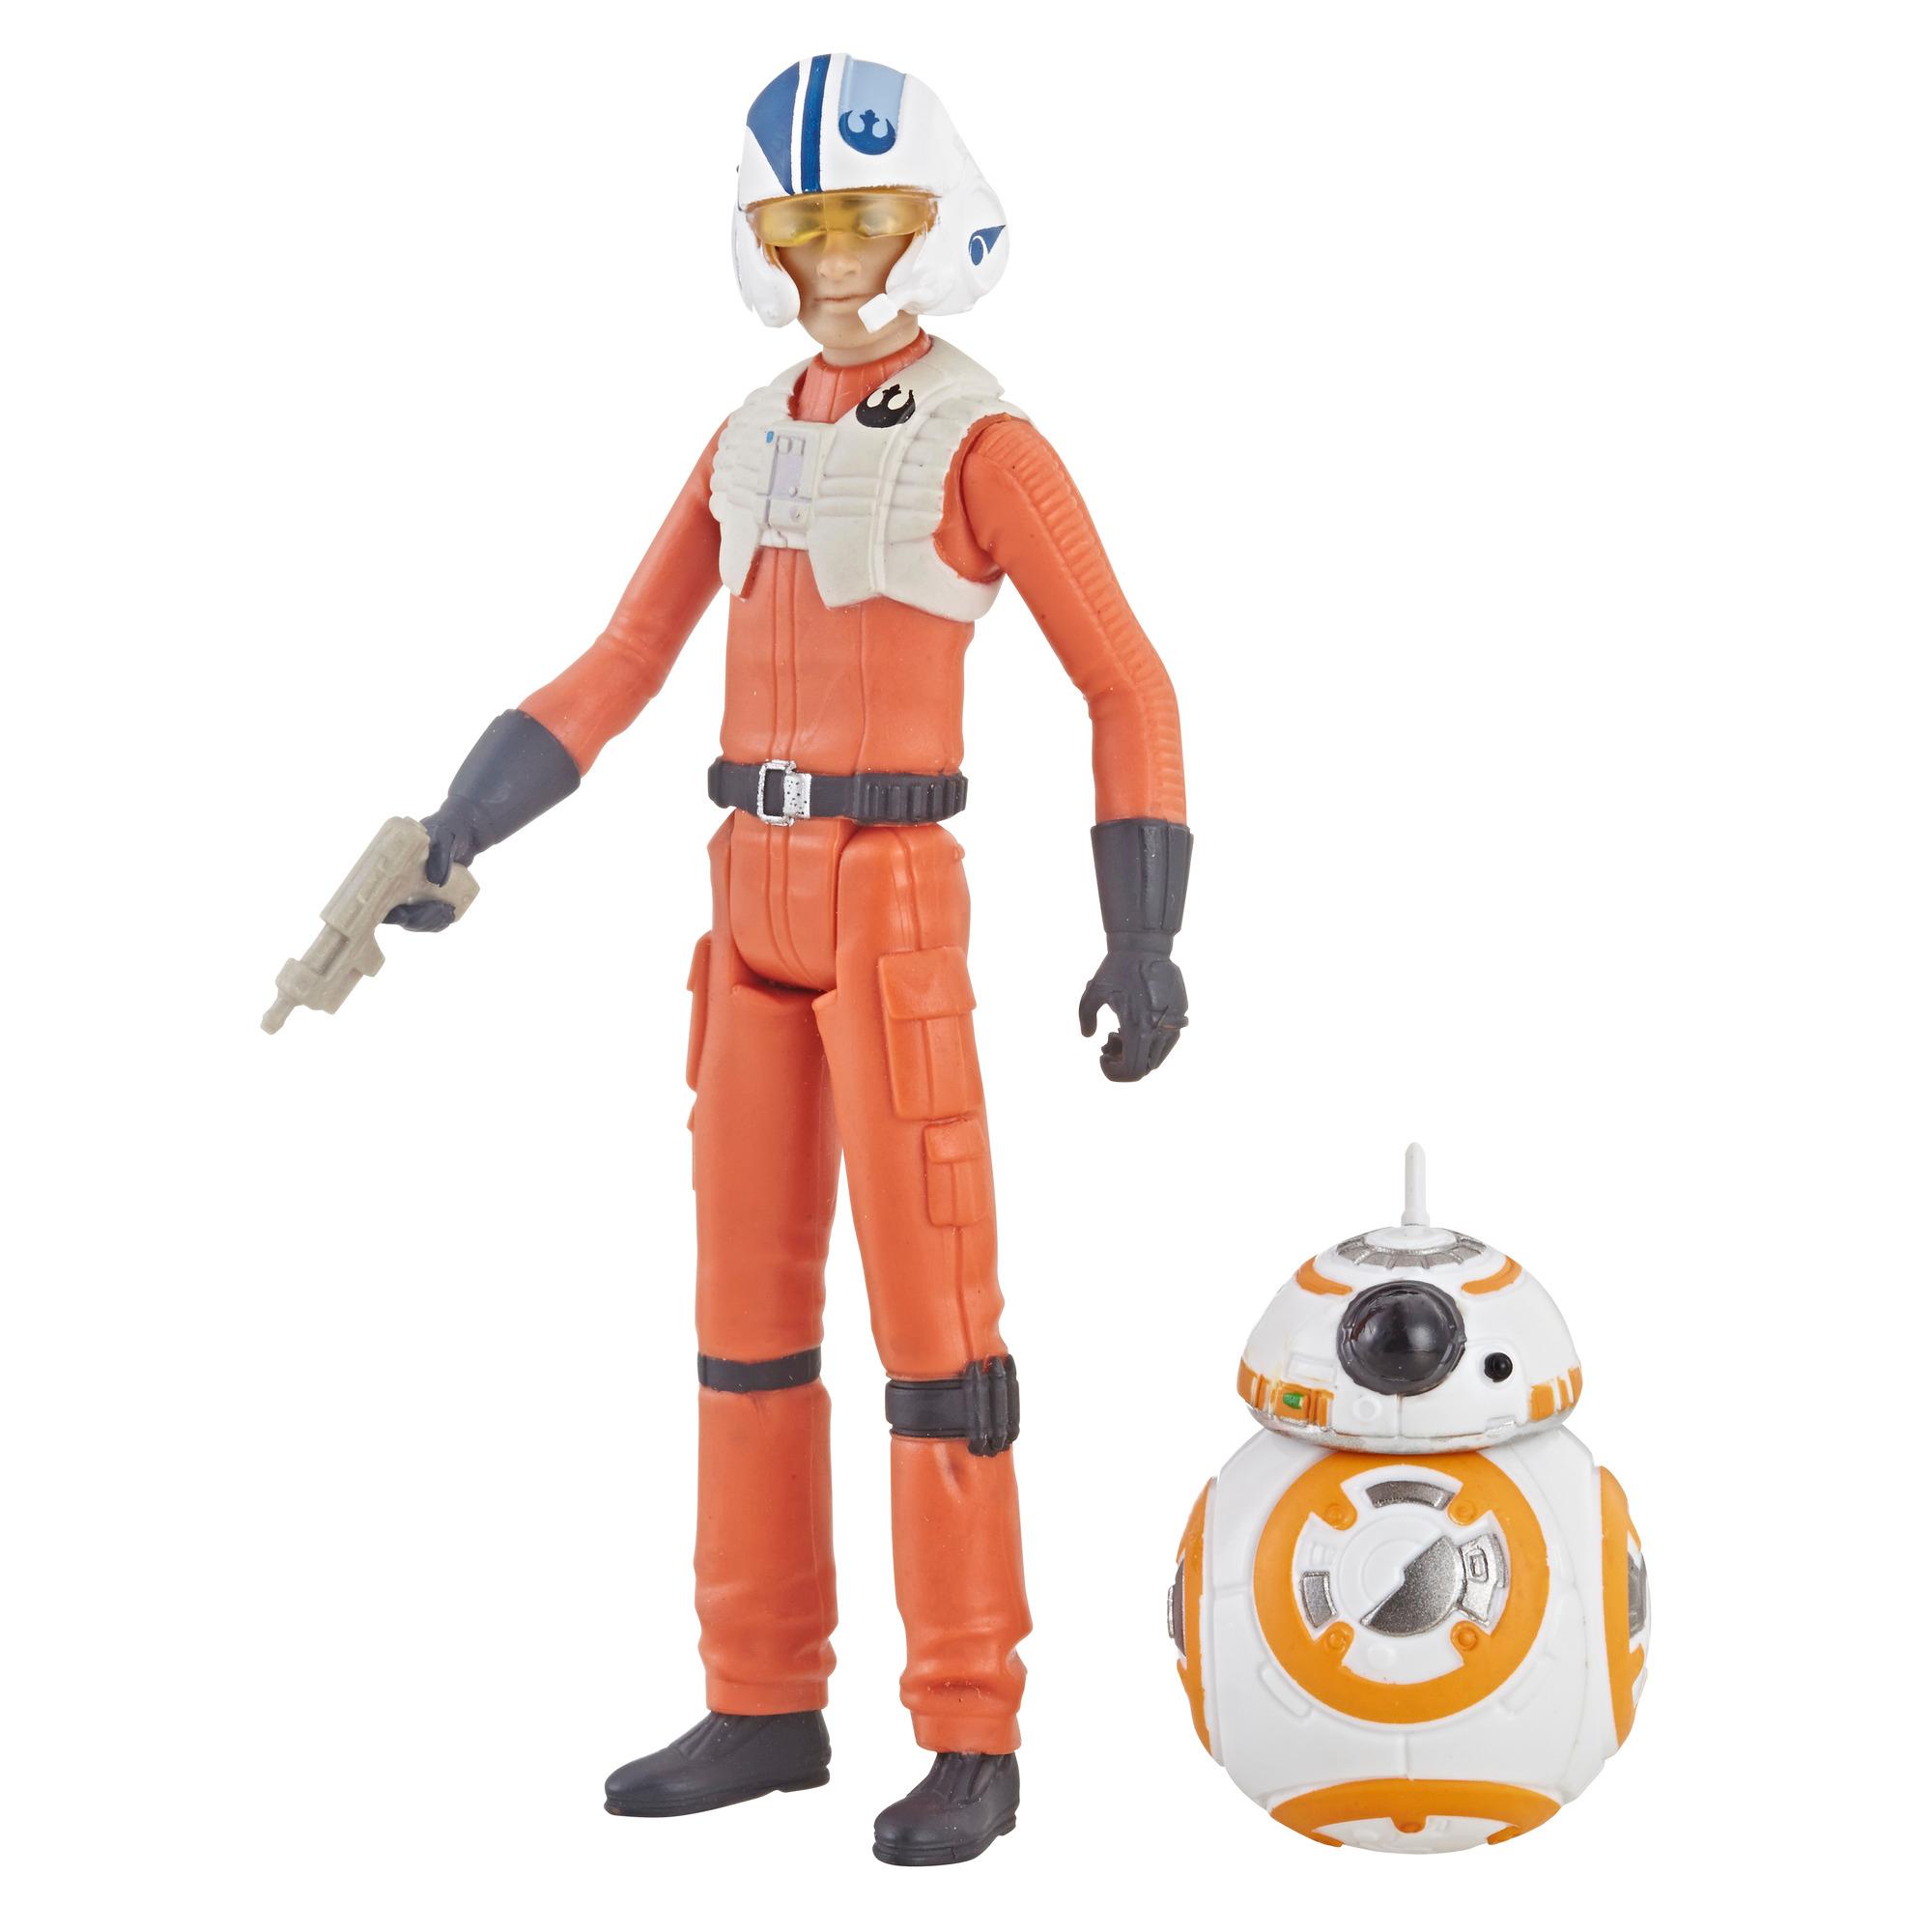 Hasbro The Force Awakens BB-8 Droid Action Figure for sale online